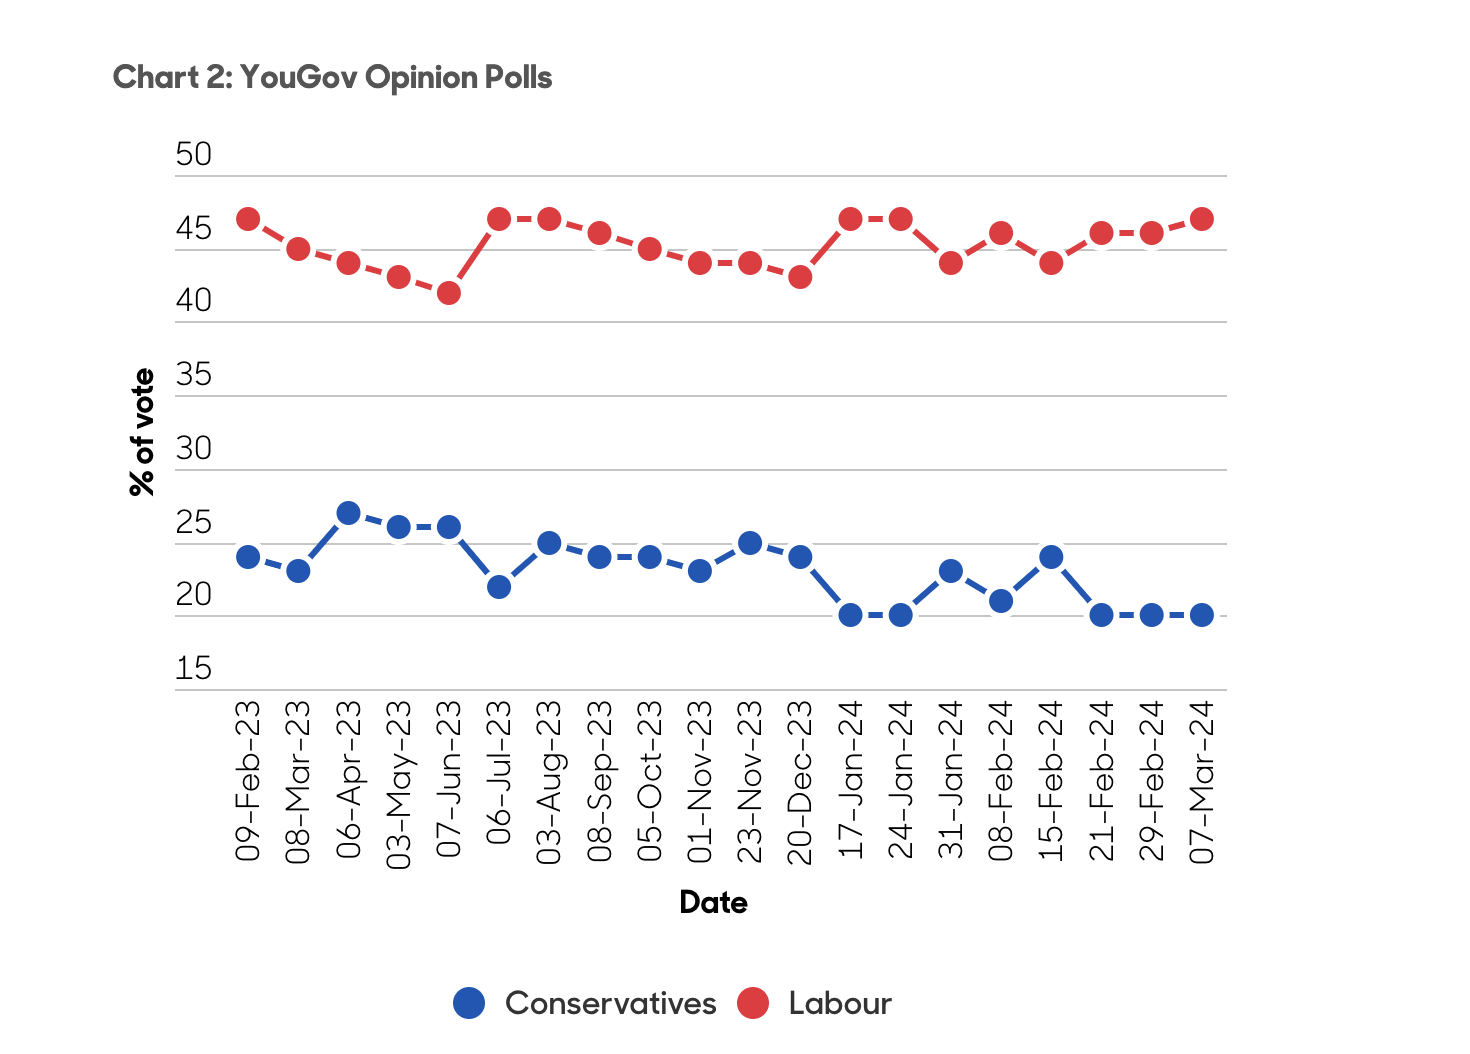 abrdn chart showing opinion polls for Tories and Labour